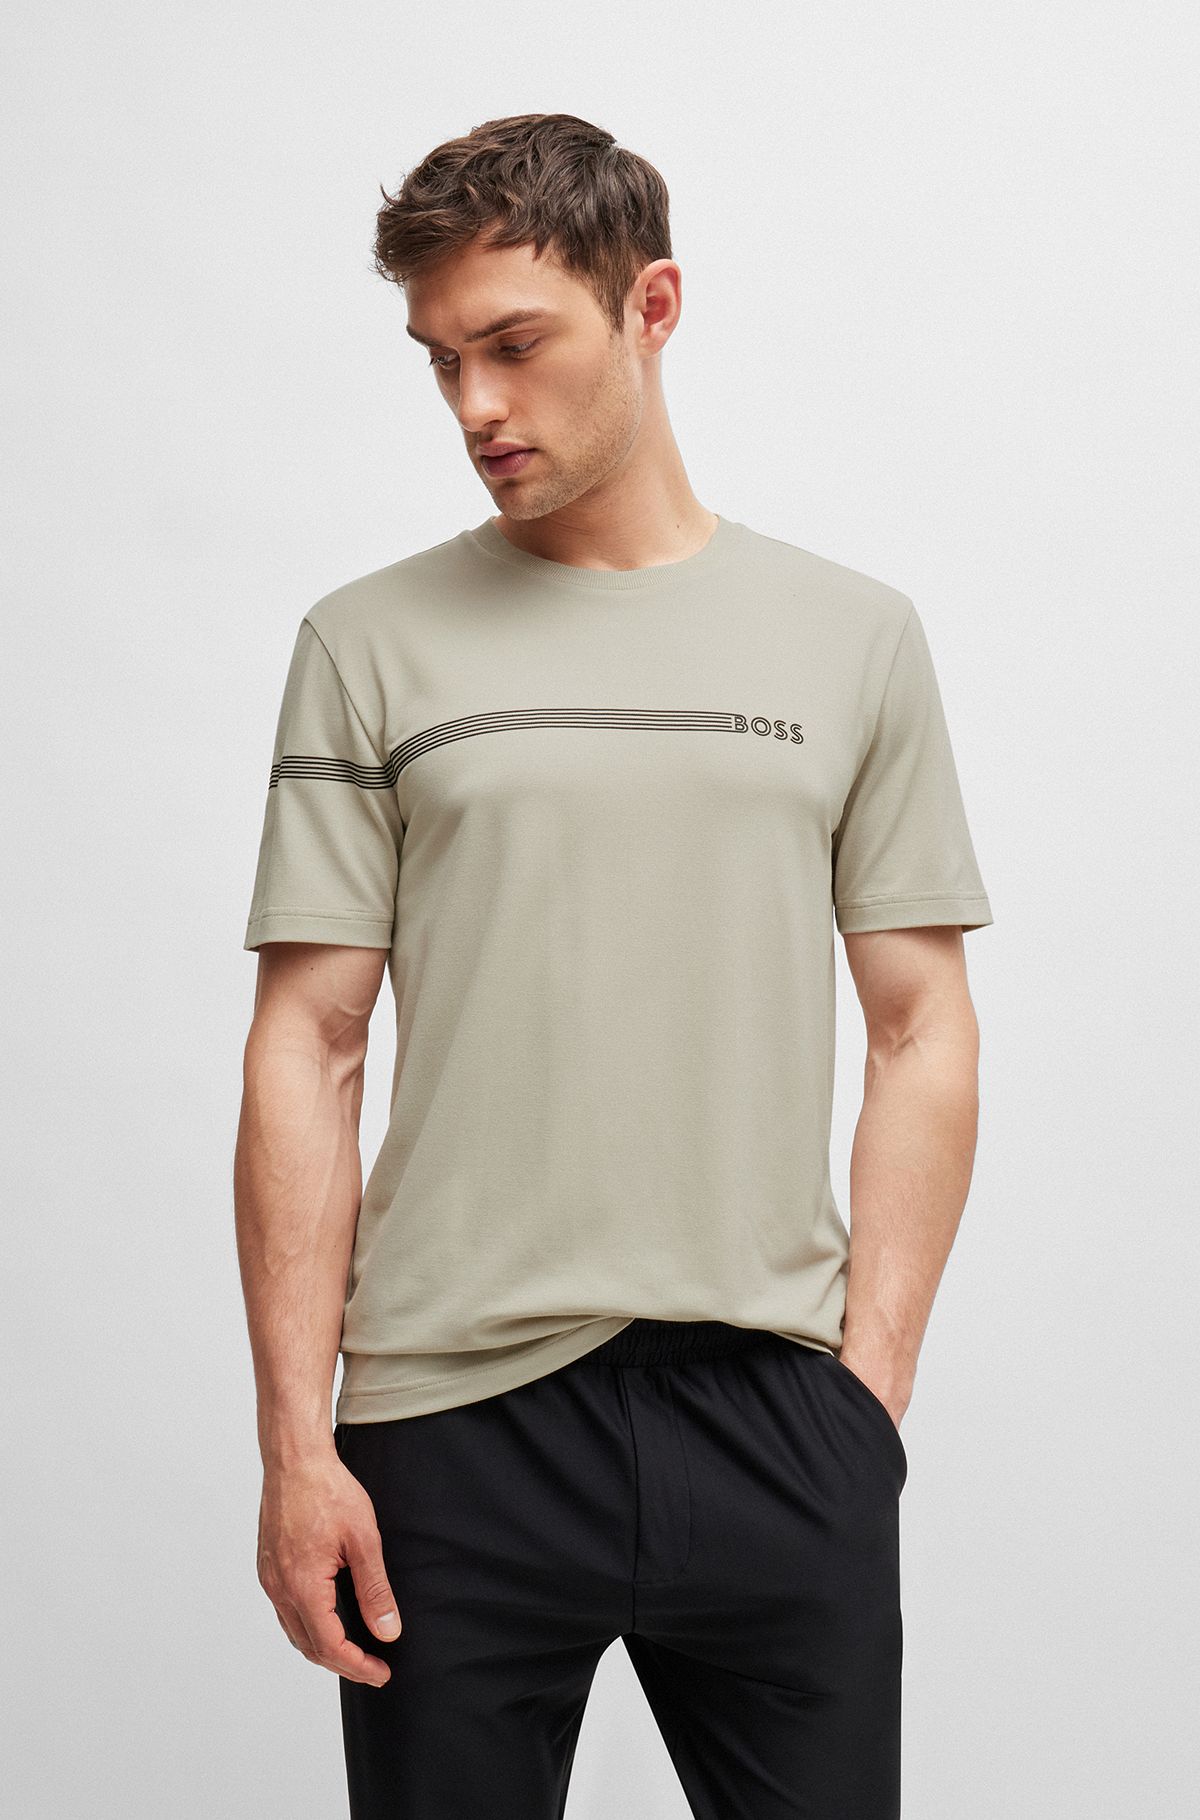 Cotton-blend T-shirt with stripes and logo, Light Beige